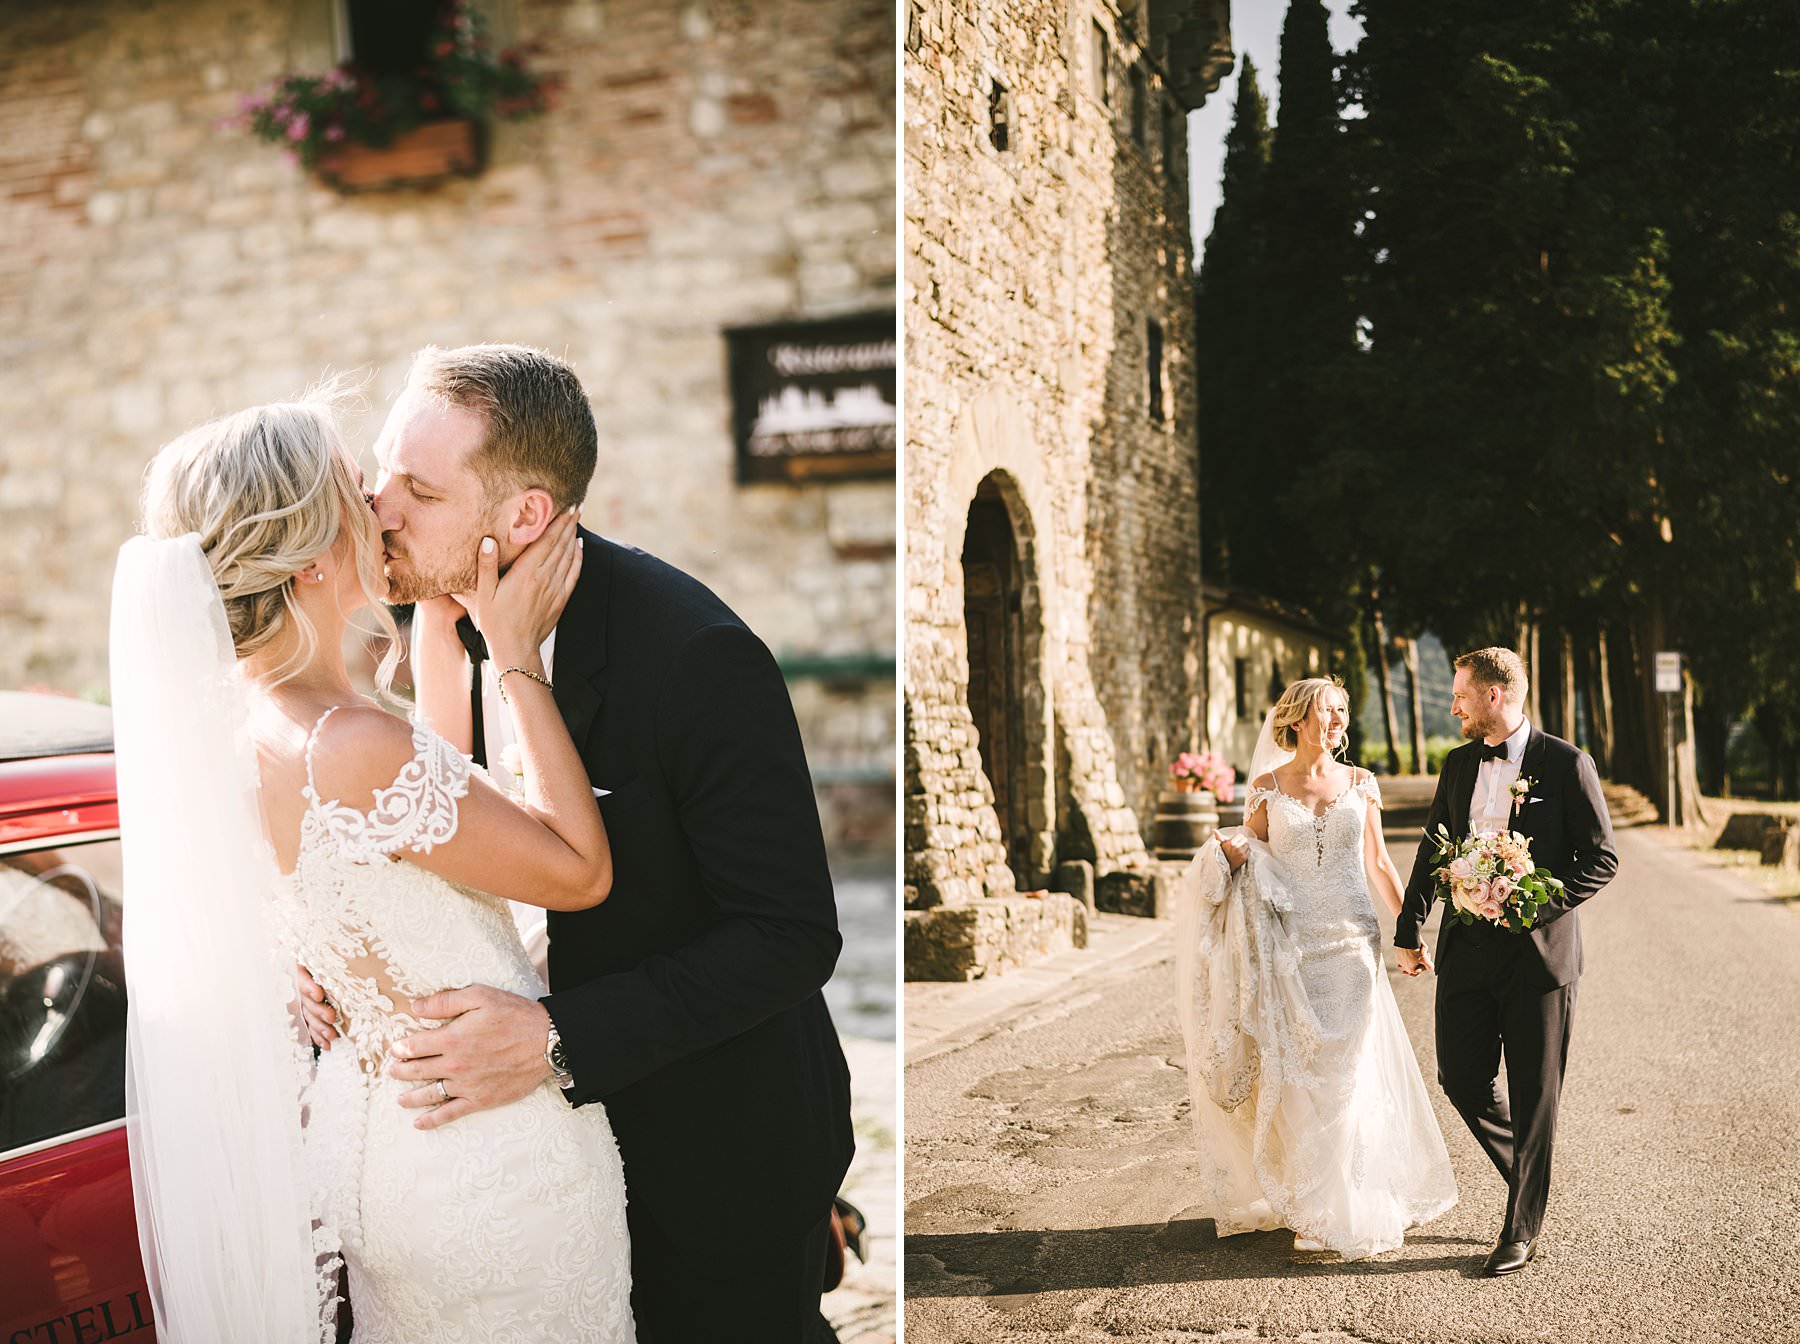 Andorra and Joseph’s romantic wedding. Lovely bride and groom portrait session during destination wedding in the countryside of Tuscany at Castello del Trebbio near Florence